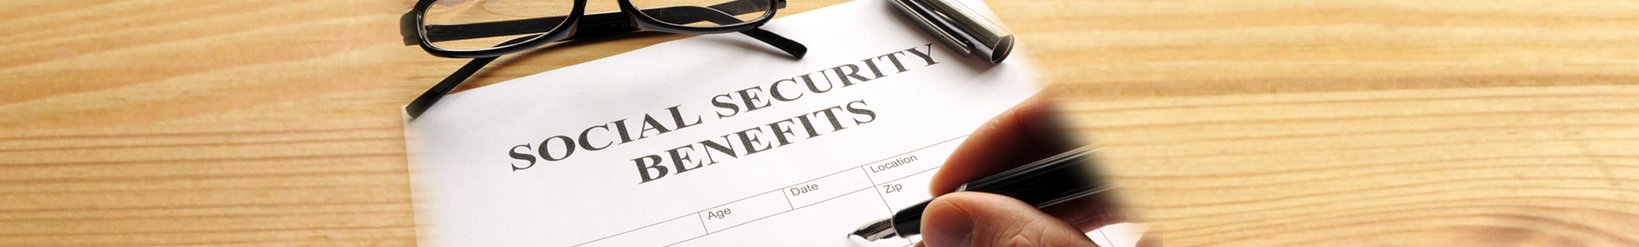 Social Security Disability Benefits for Arthritis or Joint Damage (Page 1)